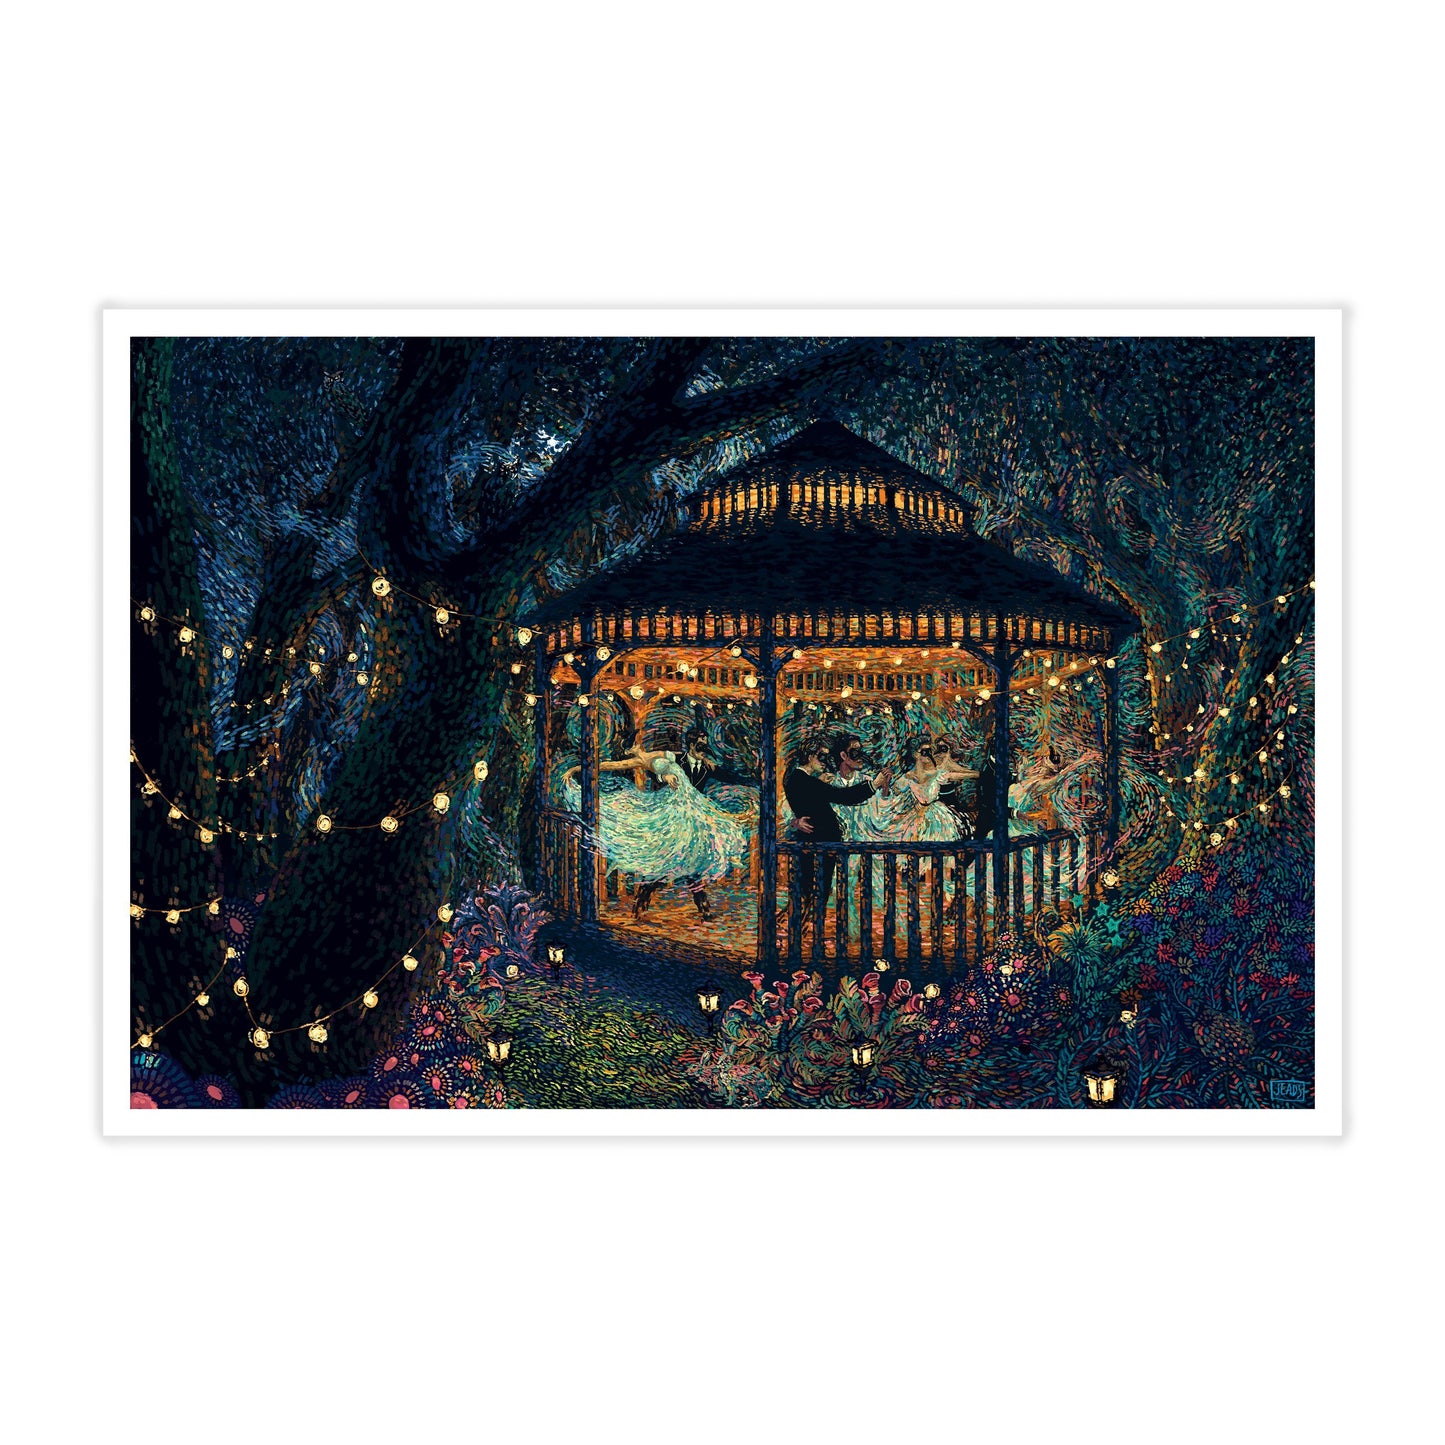 Trip the Light Fantastic, Too (Limited Edition of 65) Print James R. Eads